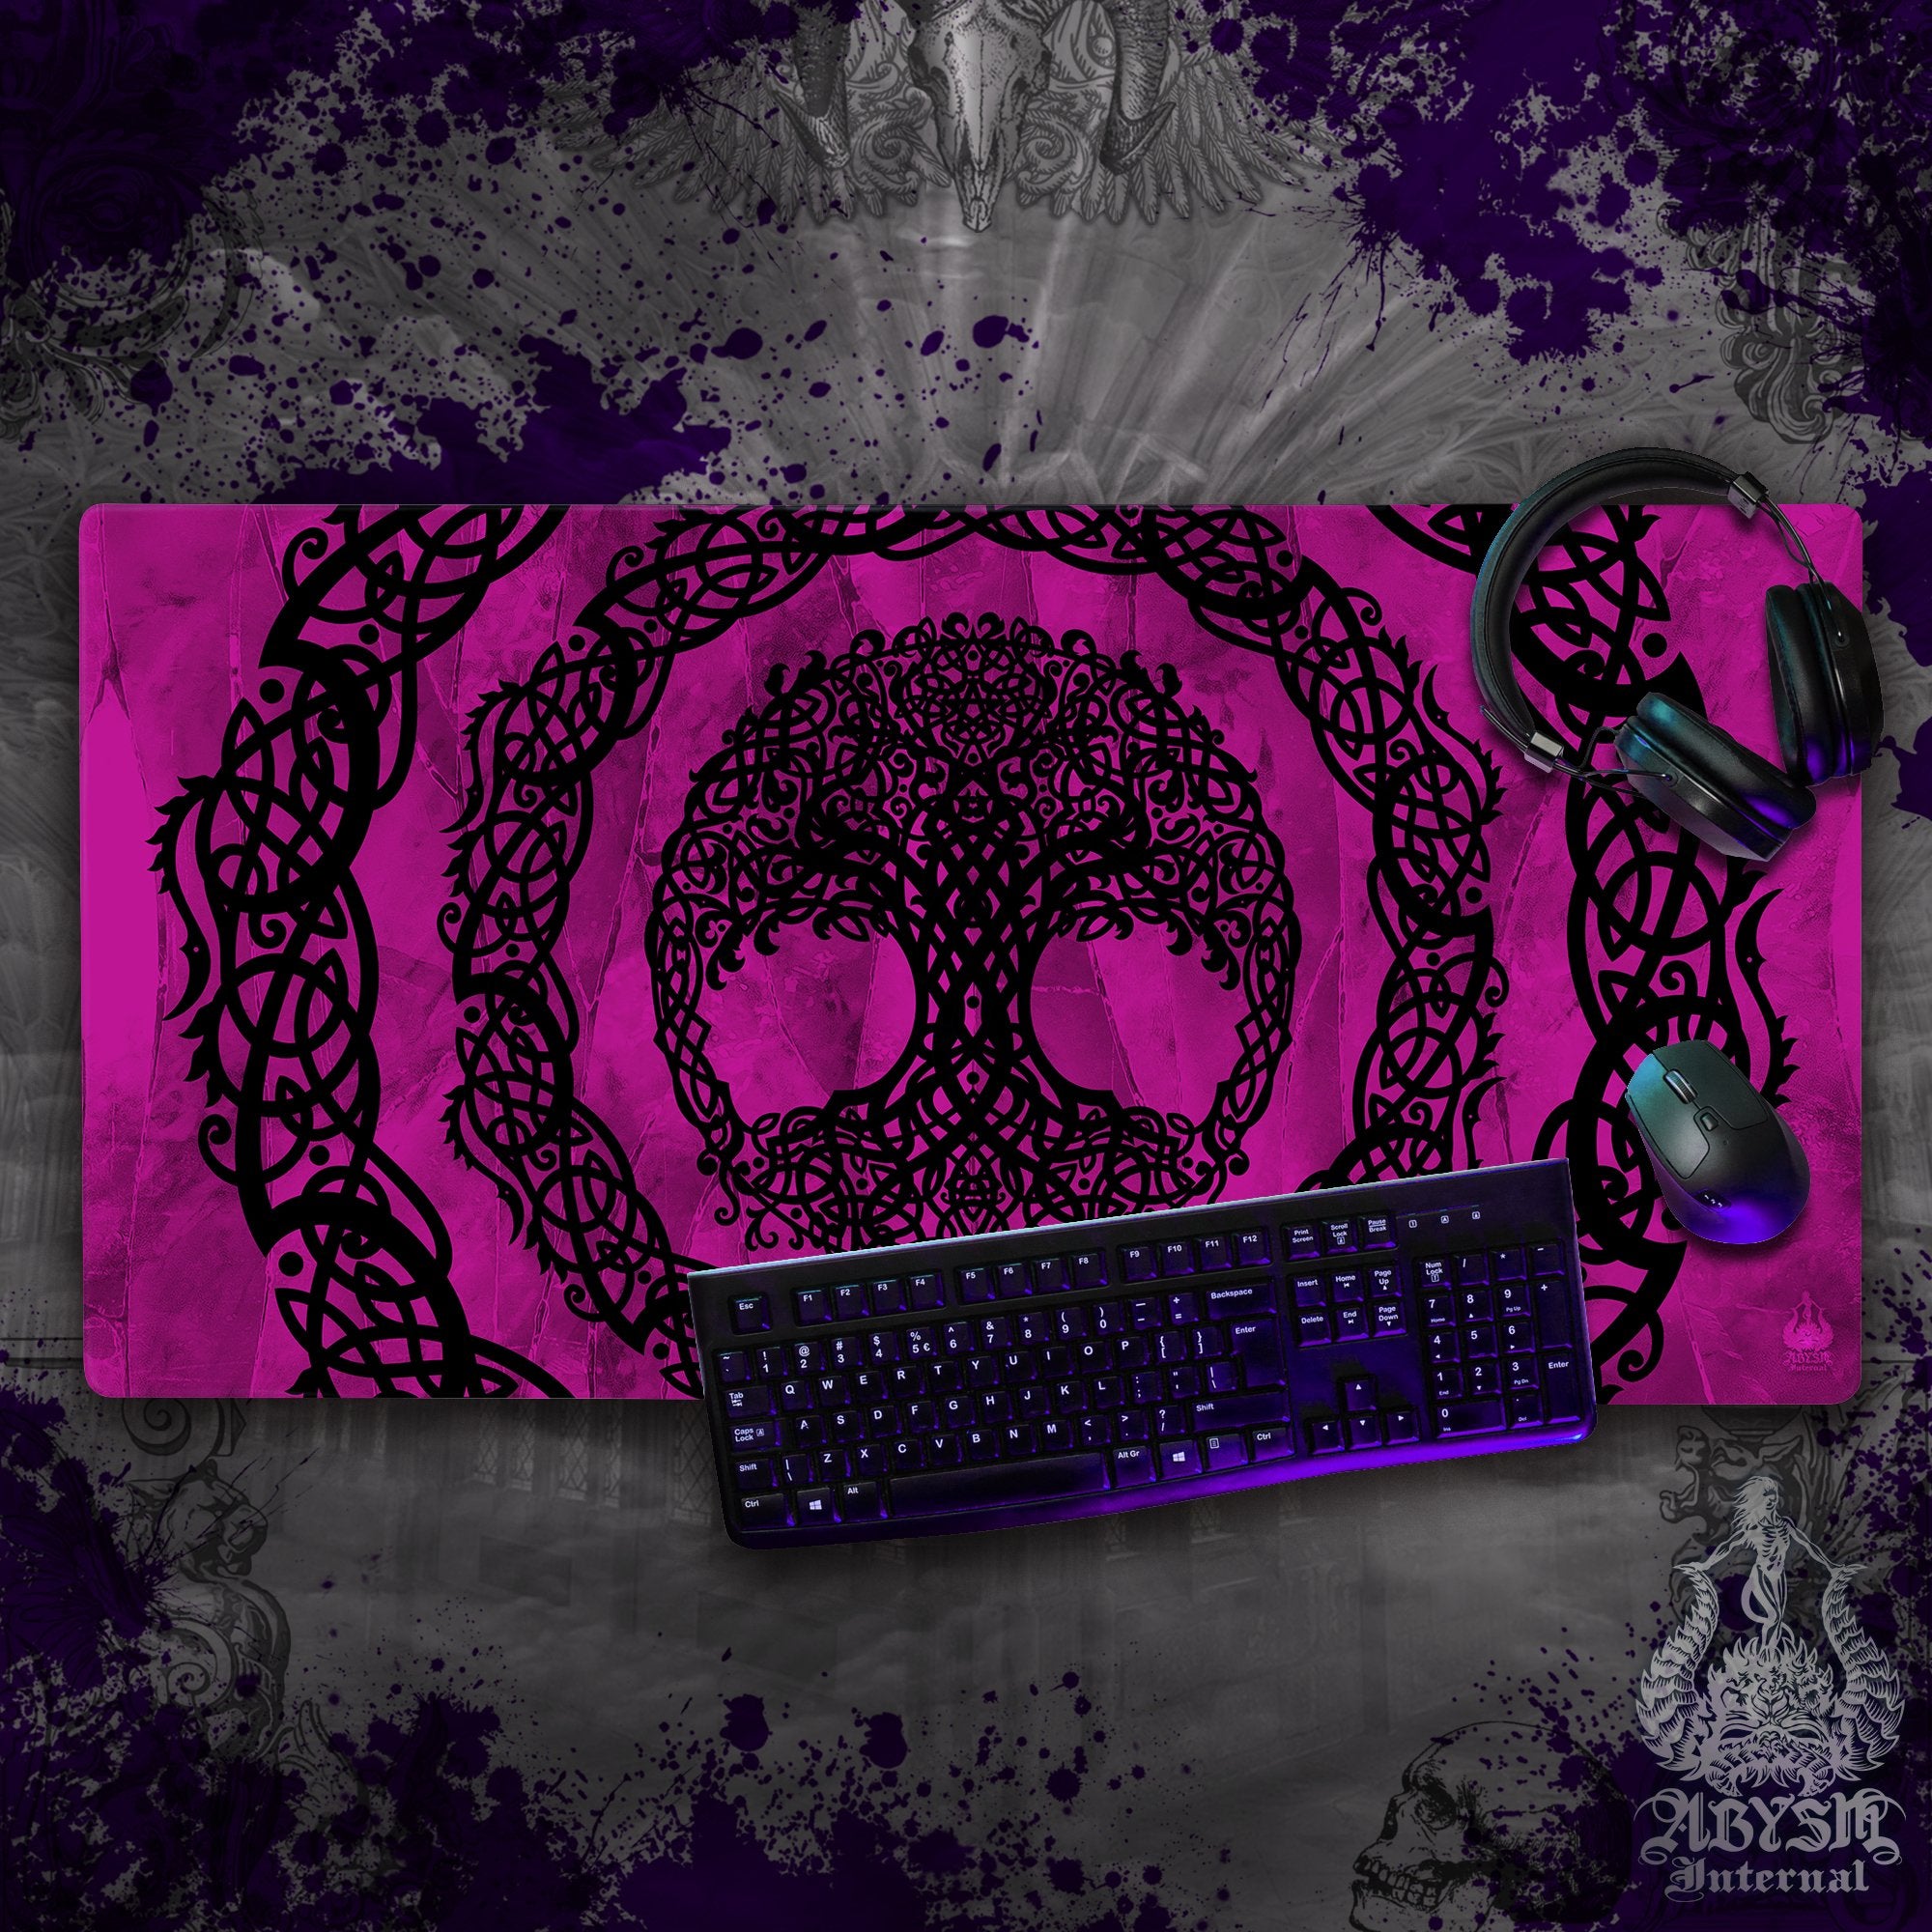 Witchy Gaming Mouse Pad, Tree of Life Desk Mat, Wicca Table Protector Cover, Celtic Knotwork Workpad, Whimsigoth Art Print - Pastel Goth, Pink and Purple Black, 2 Colors - Abysm Internal